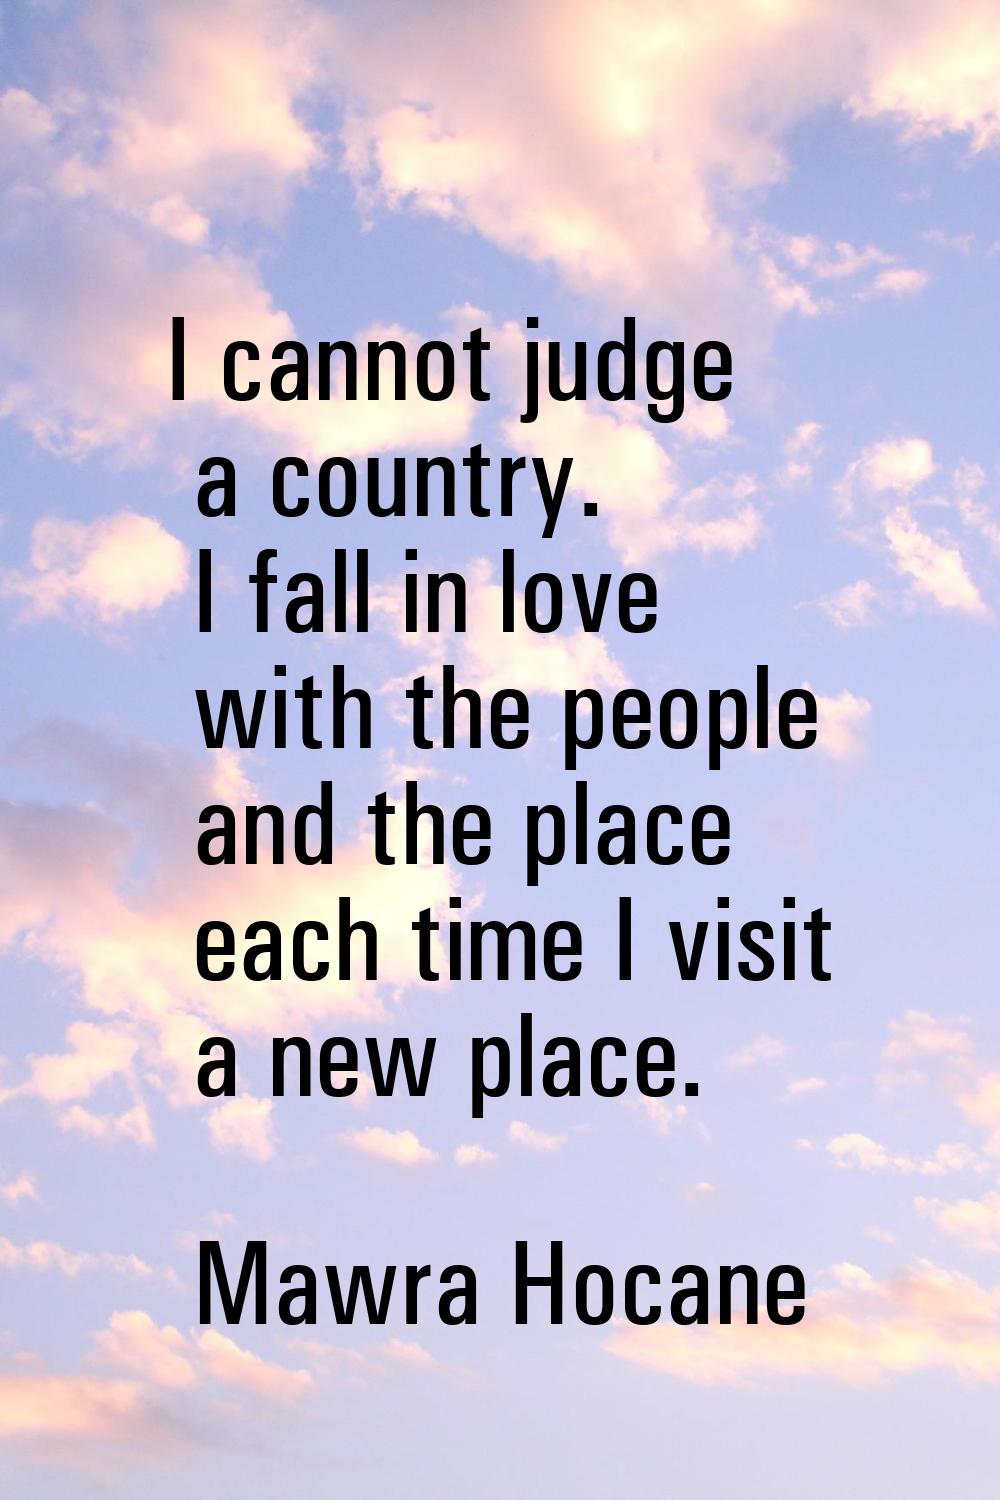 I cannot judge a country. I fall in love with the people and the place each time I visit a new plac